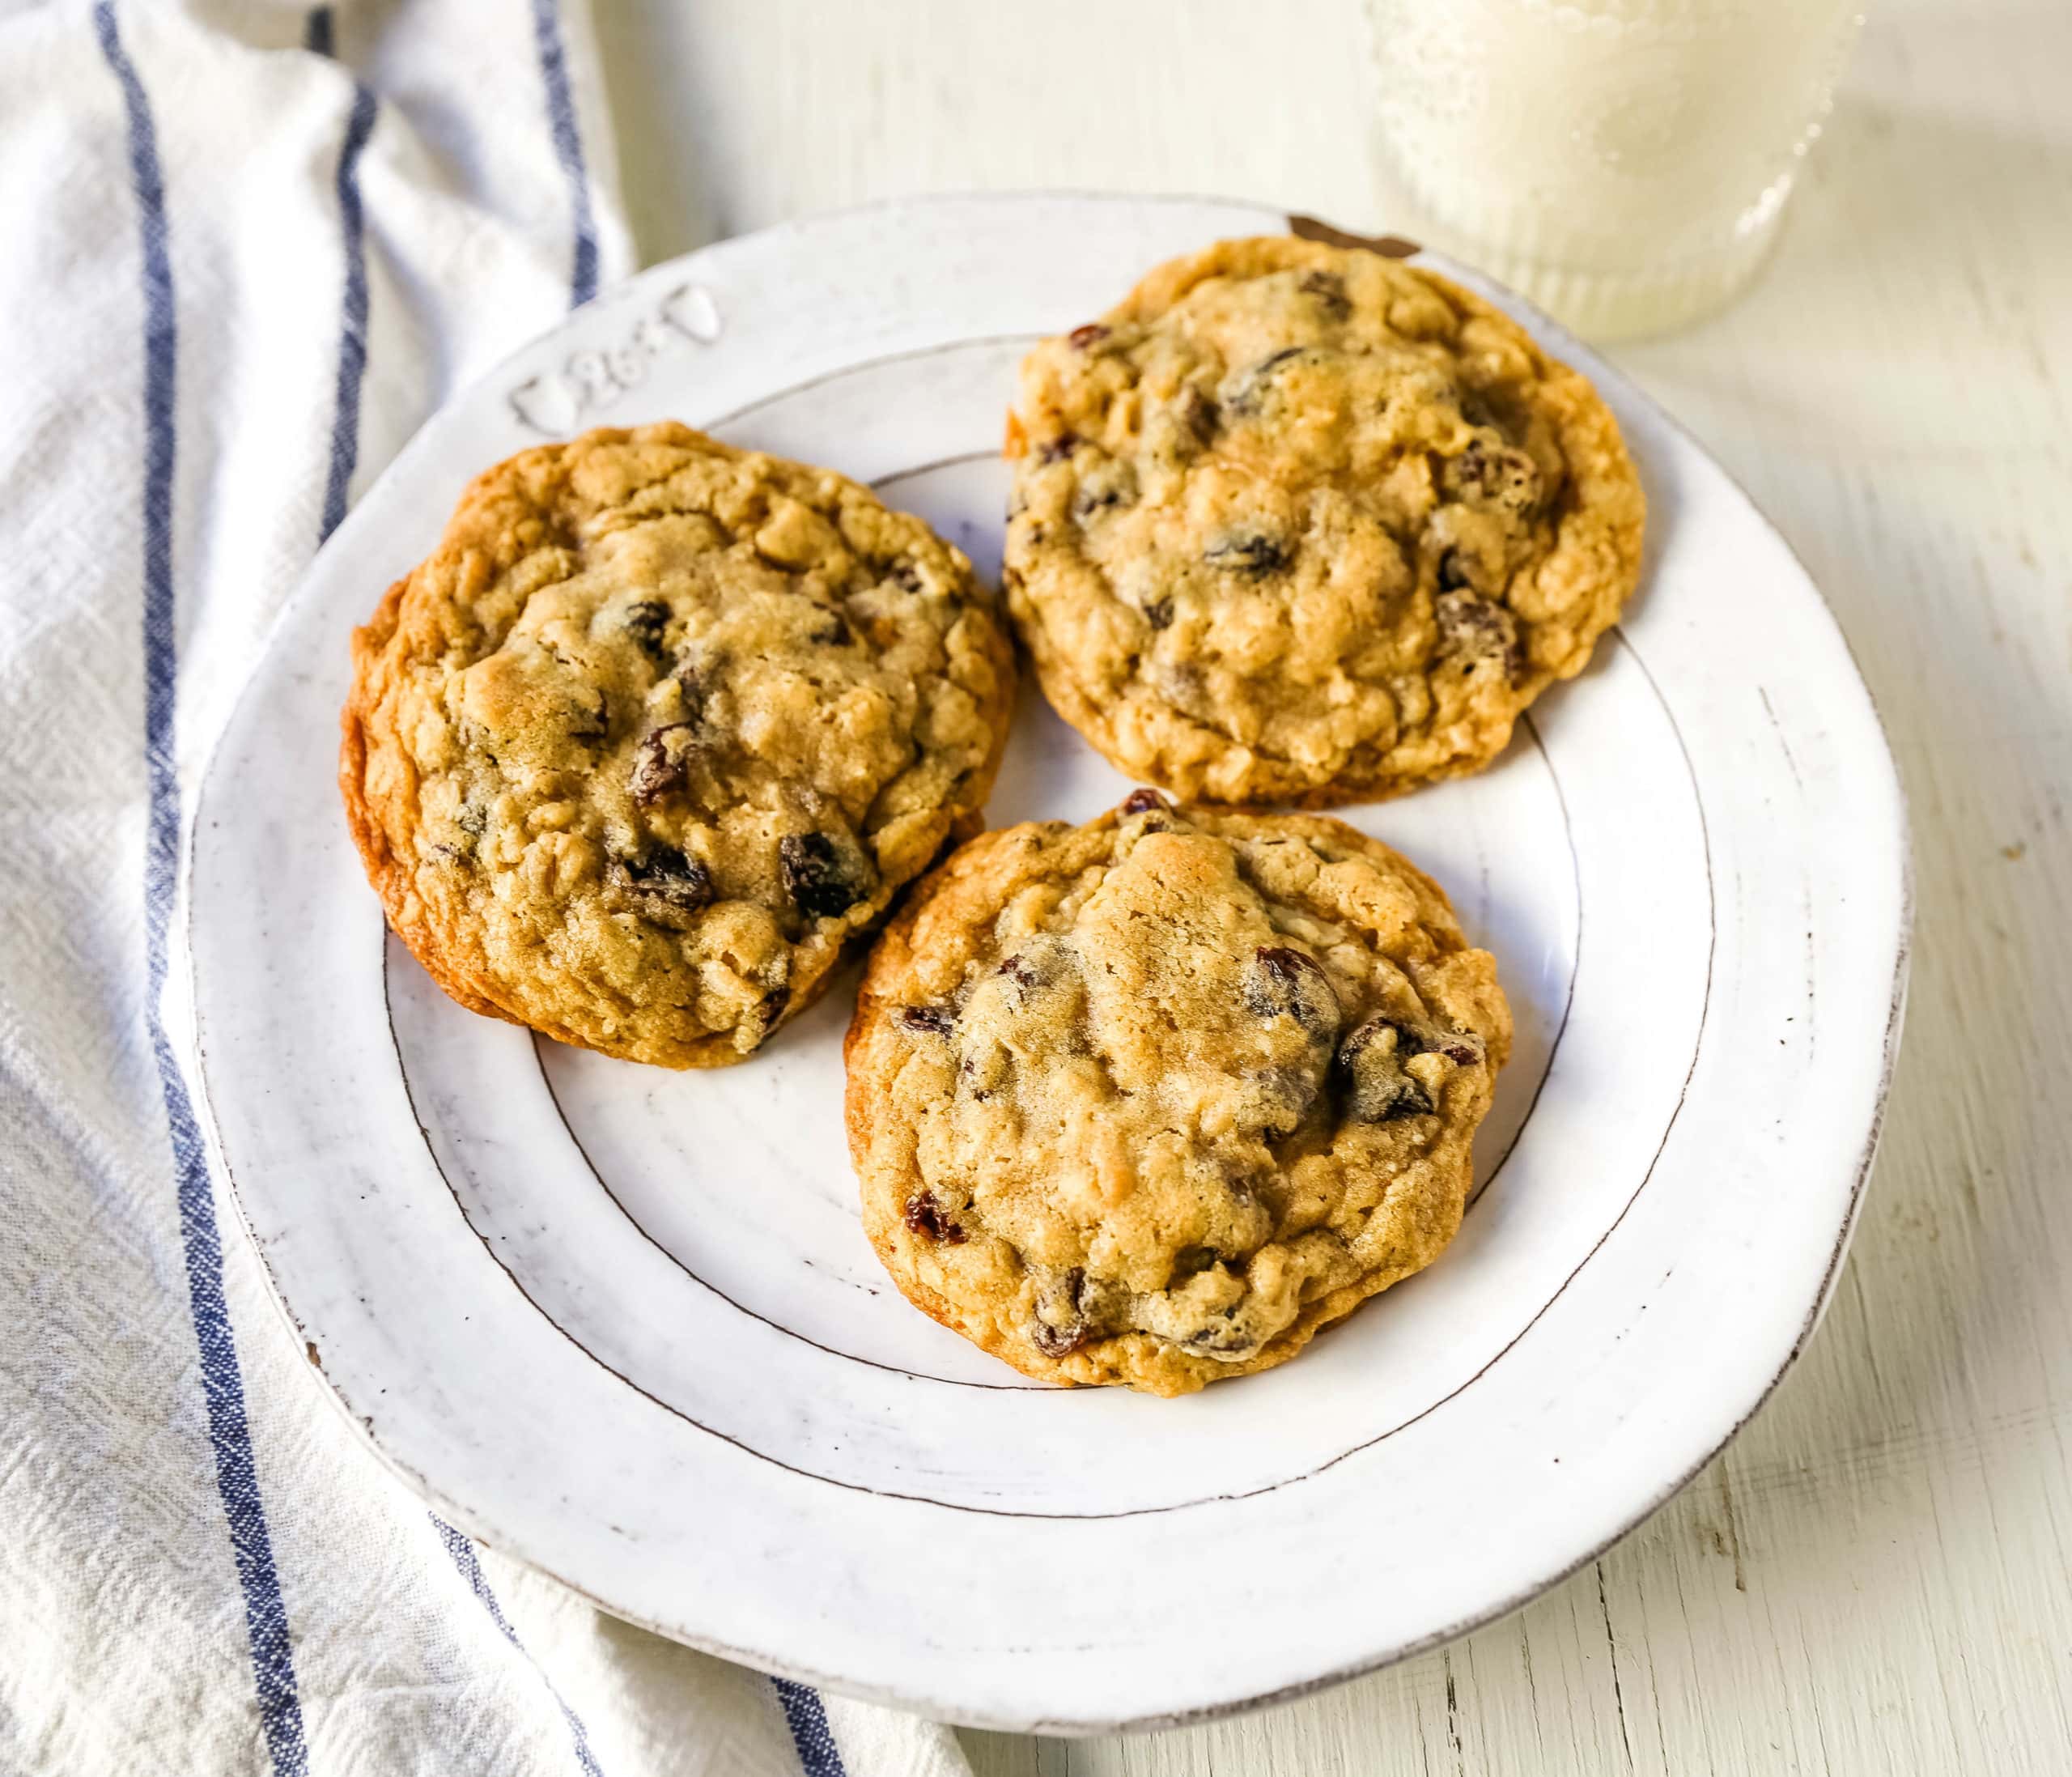 The Best Oatmeal Raisin Cookies These soft, chewy oatmeal cookies with plump raisins are the best oatmeal cookie recipe on the planet. www.modernhoney.com #oatmealraisincookies #oatmealcookies #oatmealraisincookie #cookies 